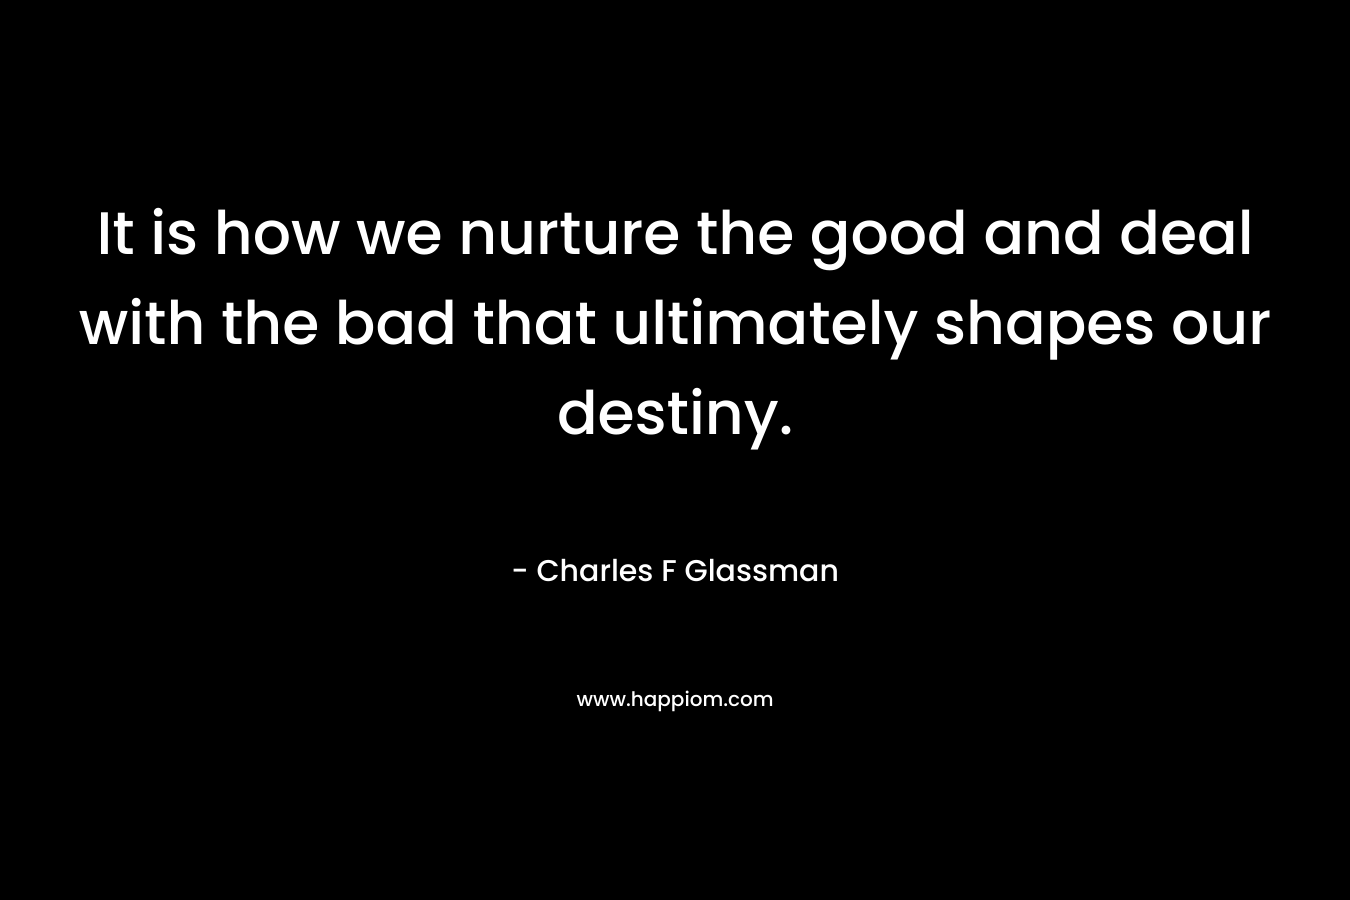 It is how we nurture the good and deal with the bad that ultimately shapes our destiny.